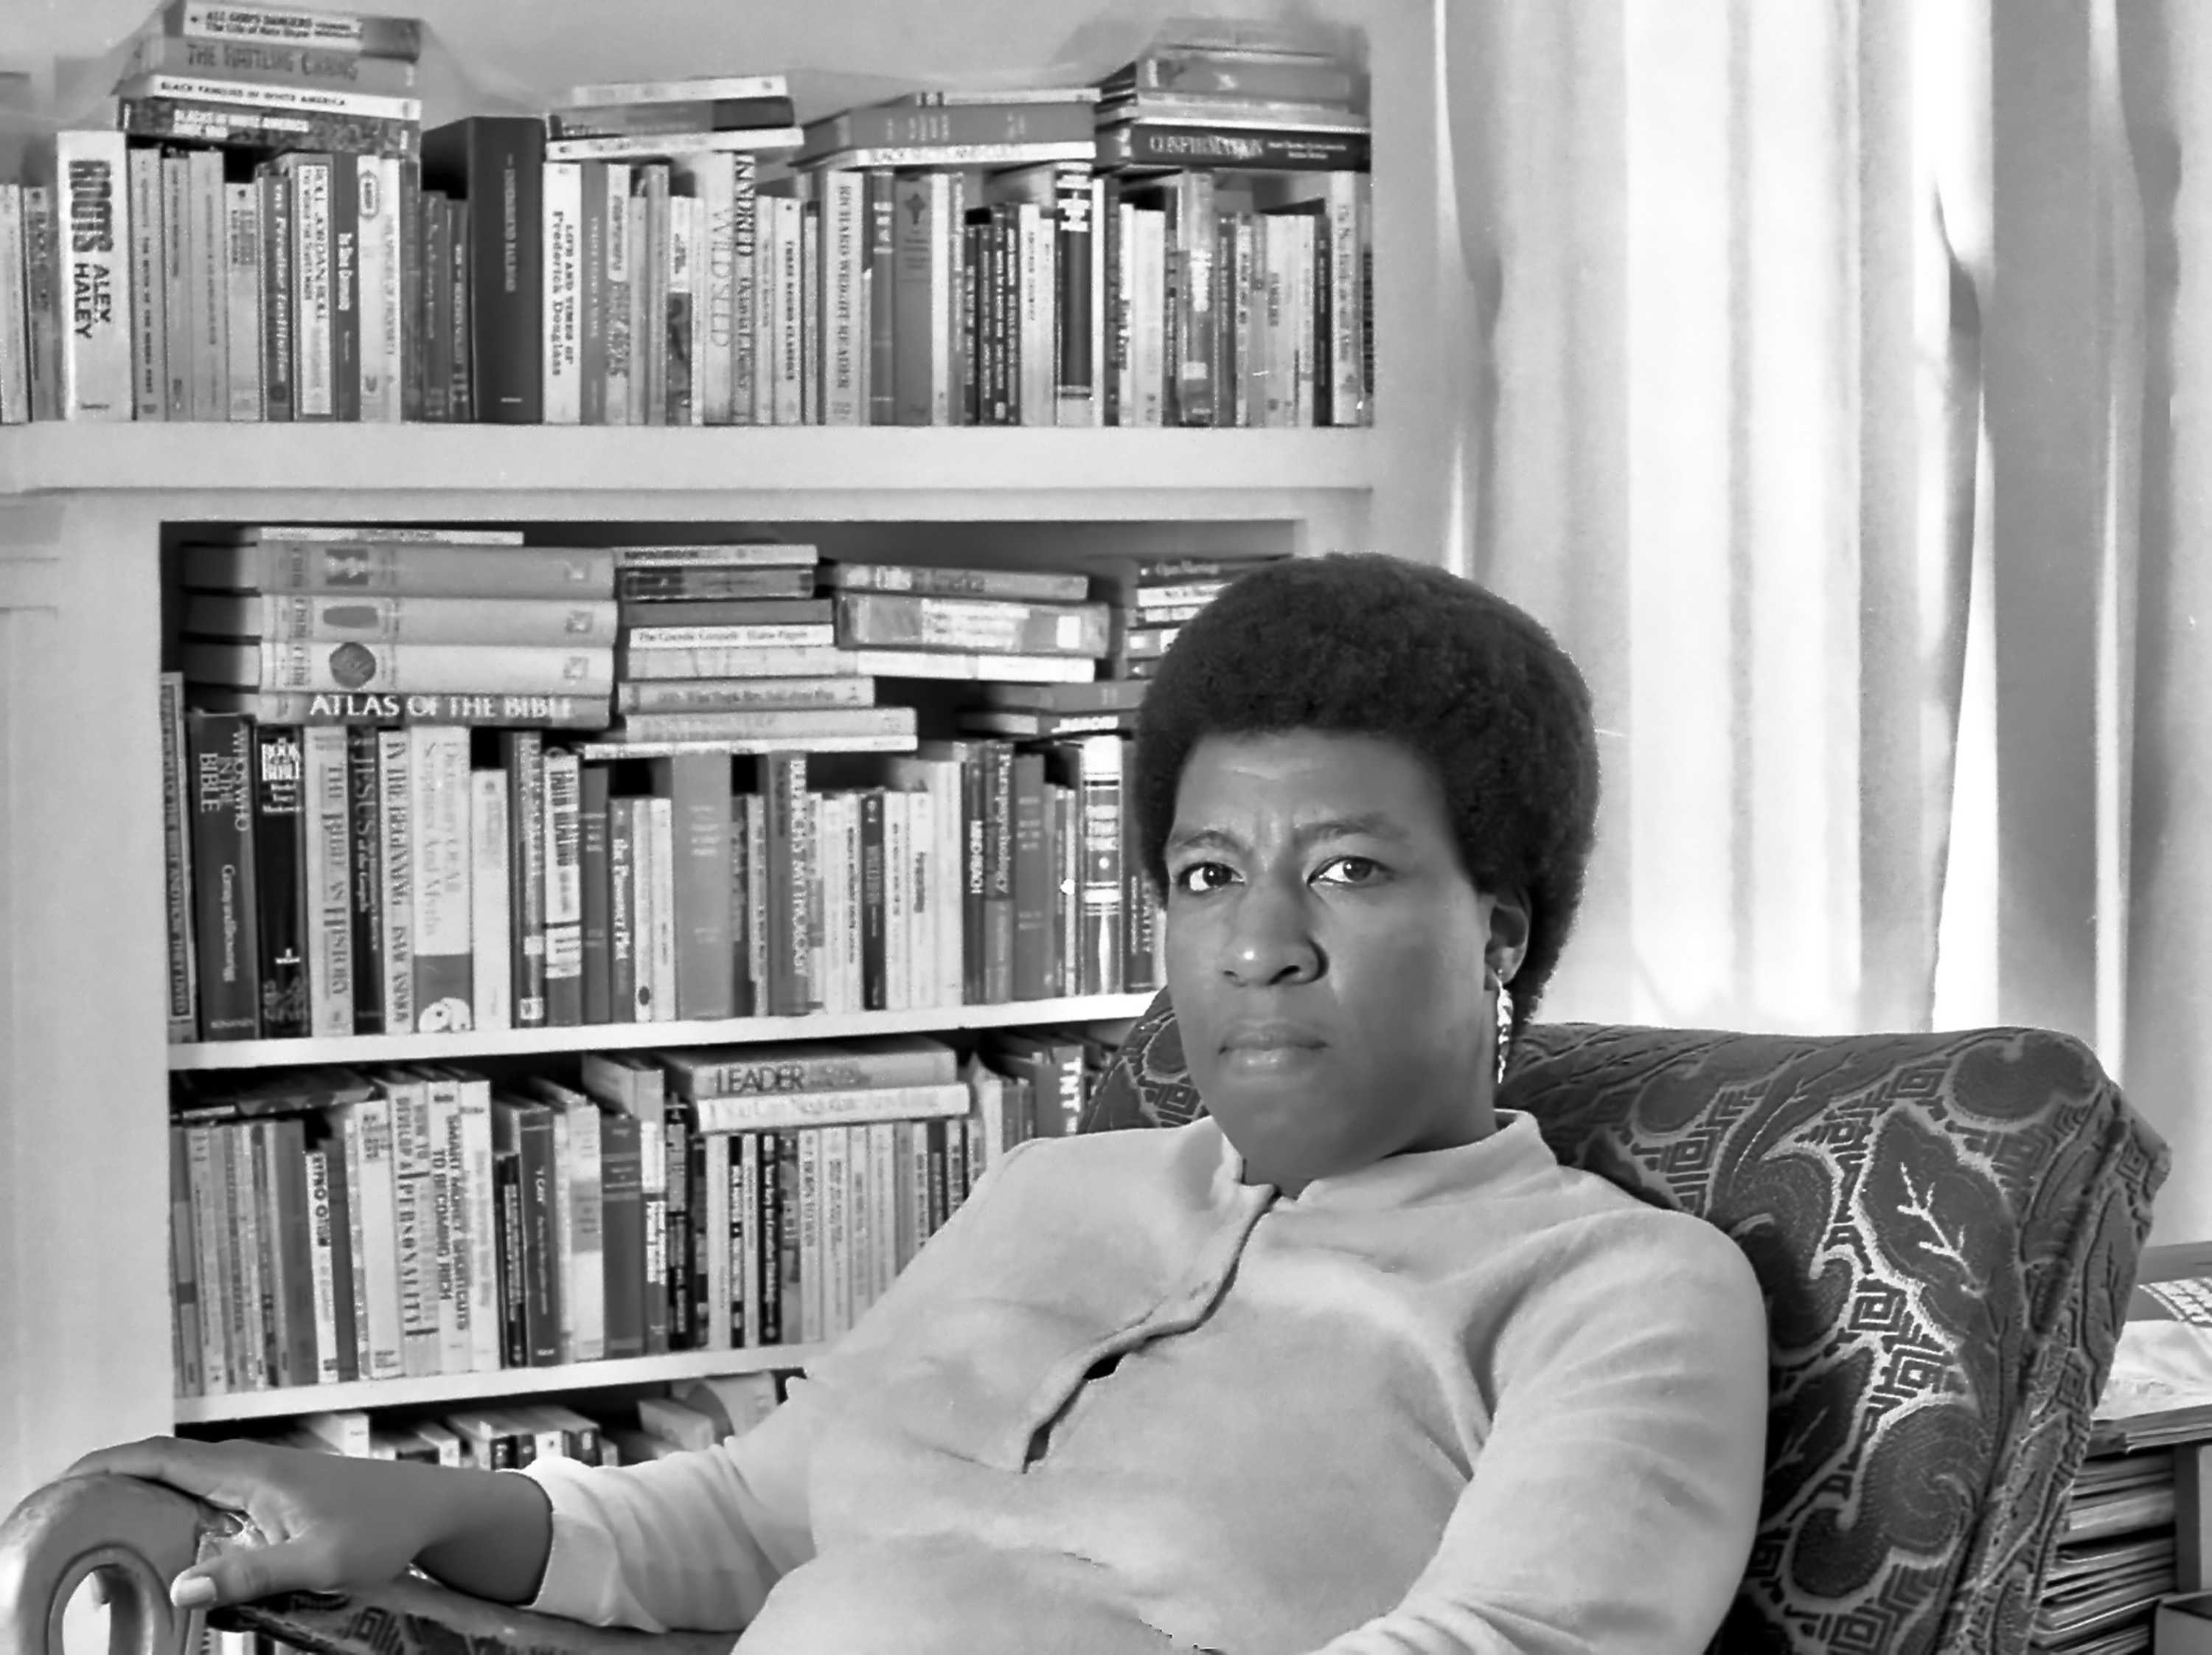 Black and white photograph of Octavia Butler sitting in front of her bookshelf.